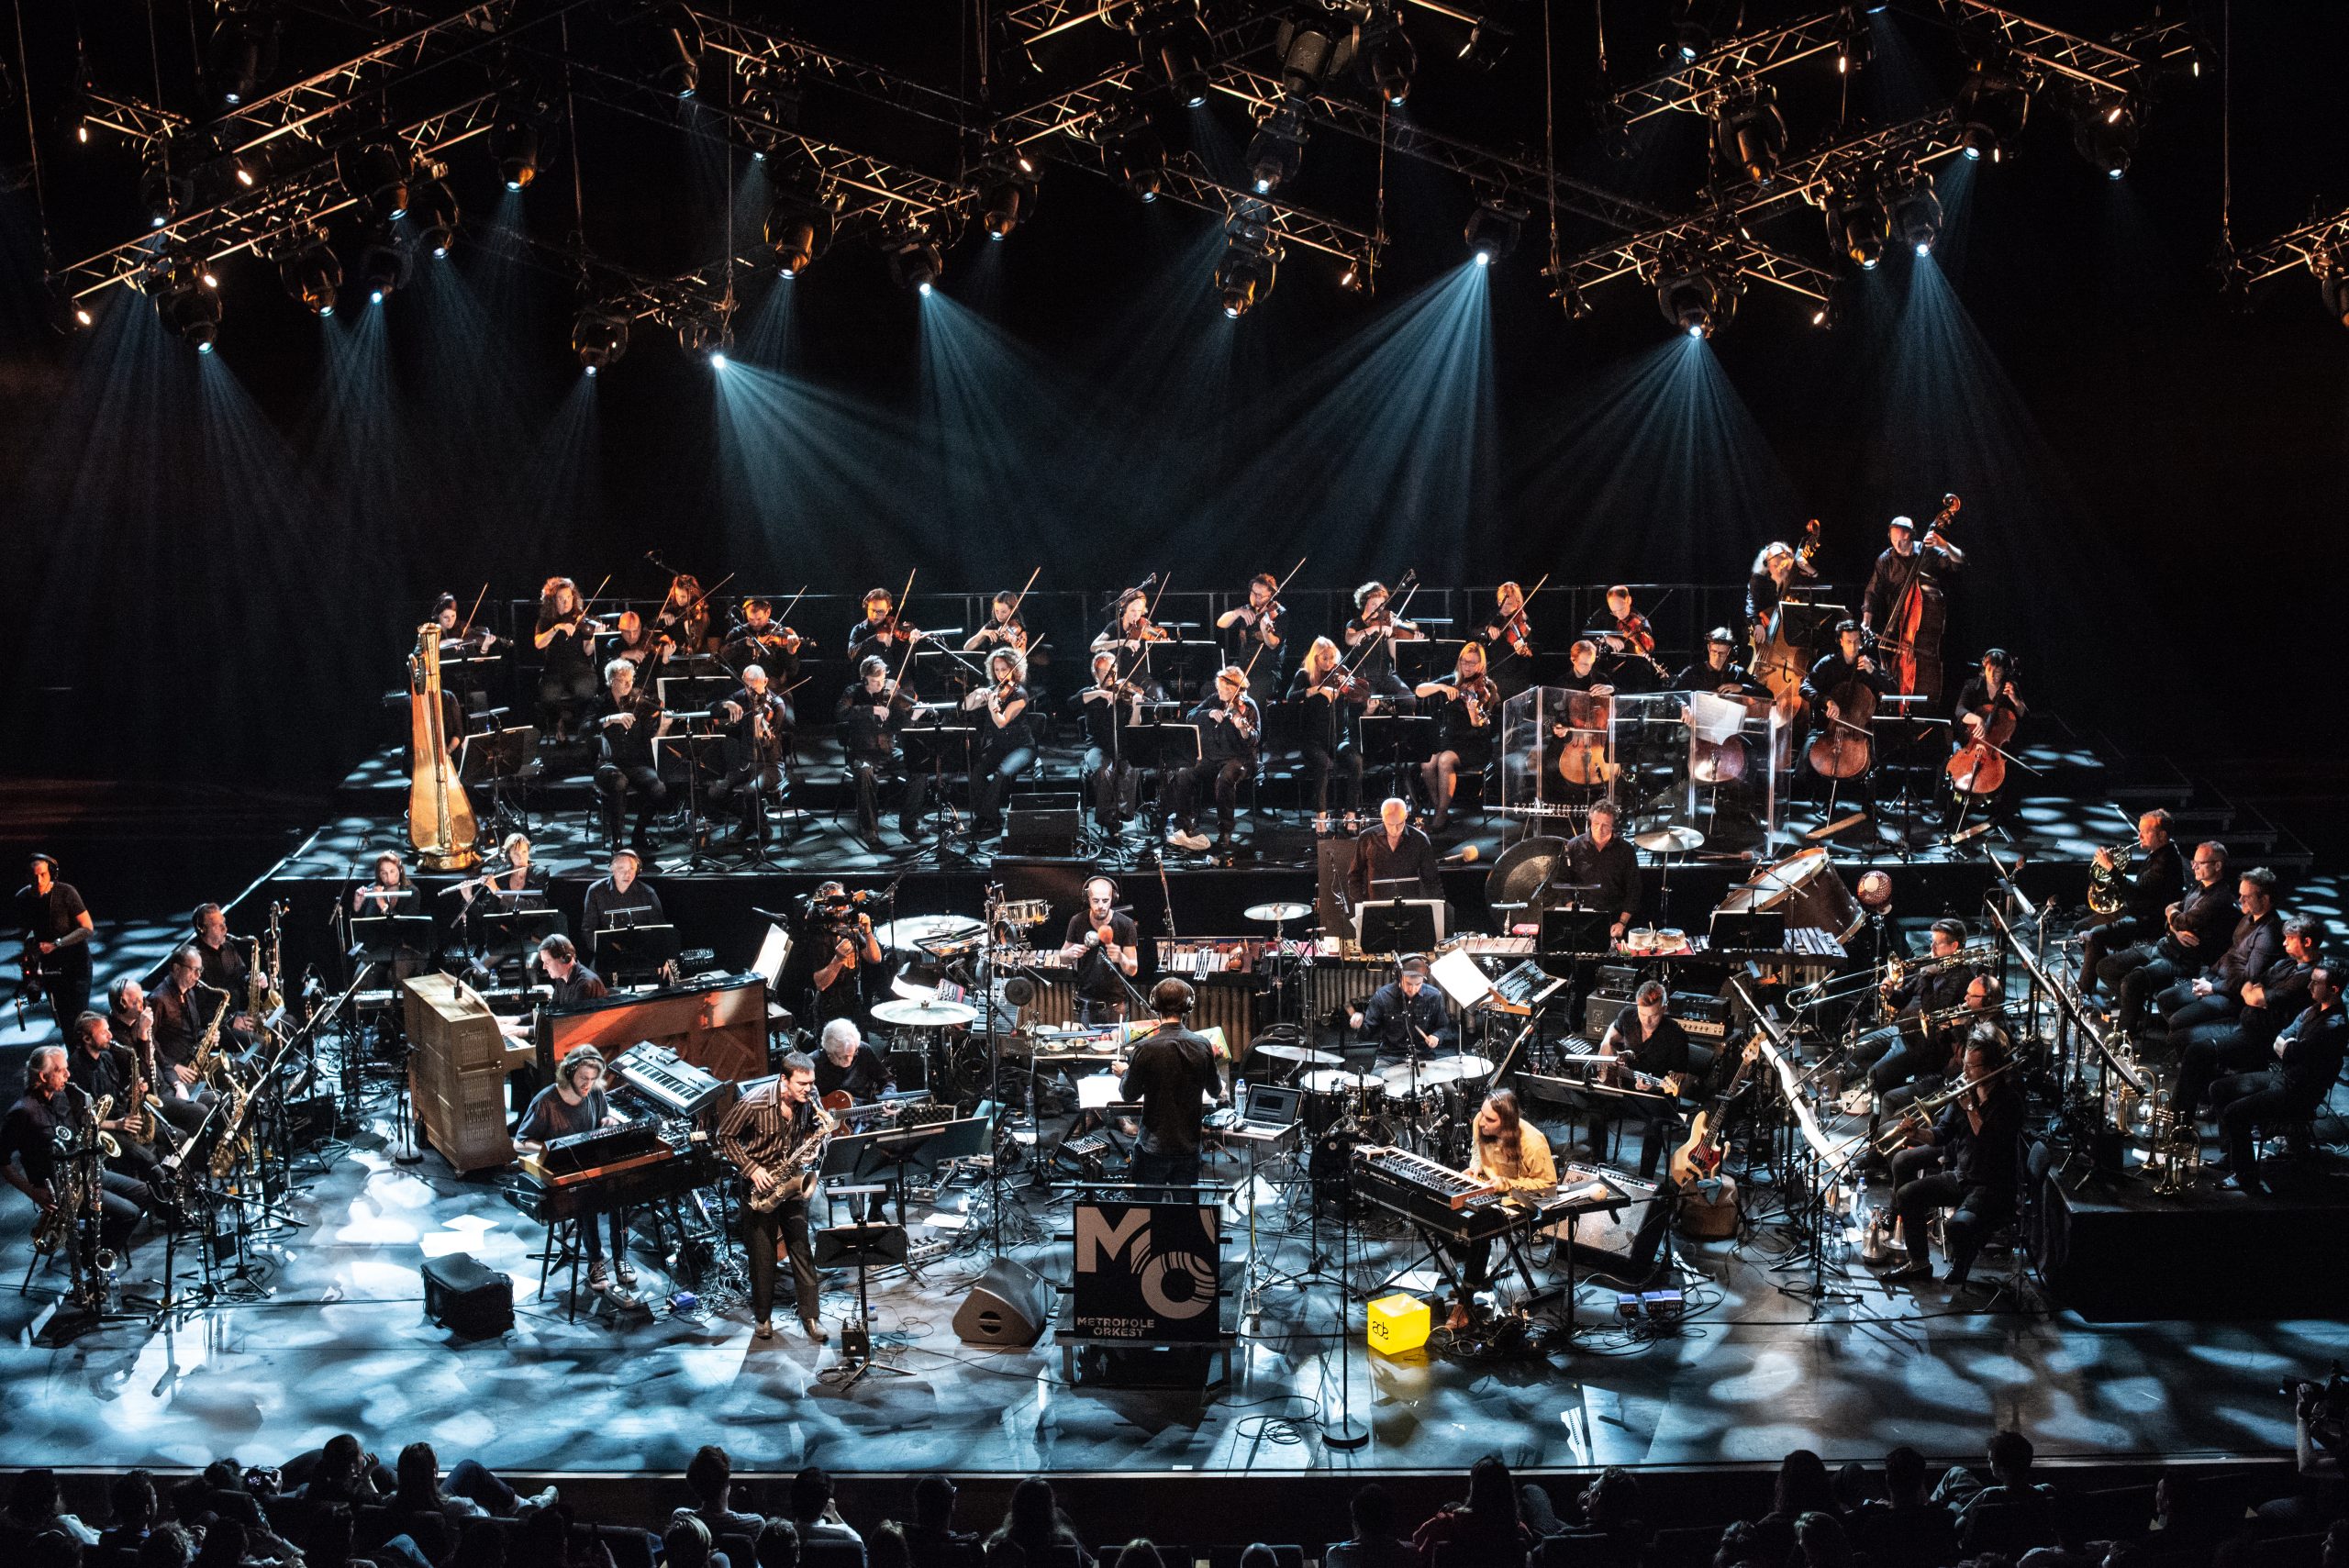 The 32nd edition will feature the Metropole Orkest, the most important pop & jazz orchestra in the world